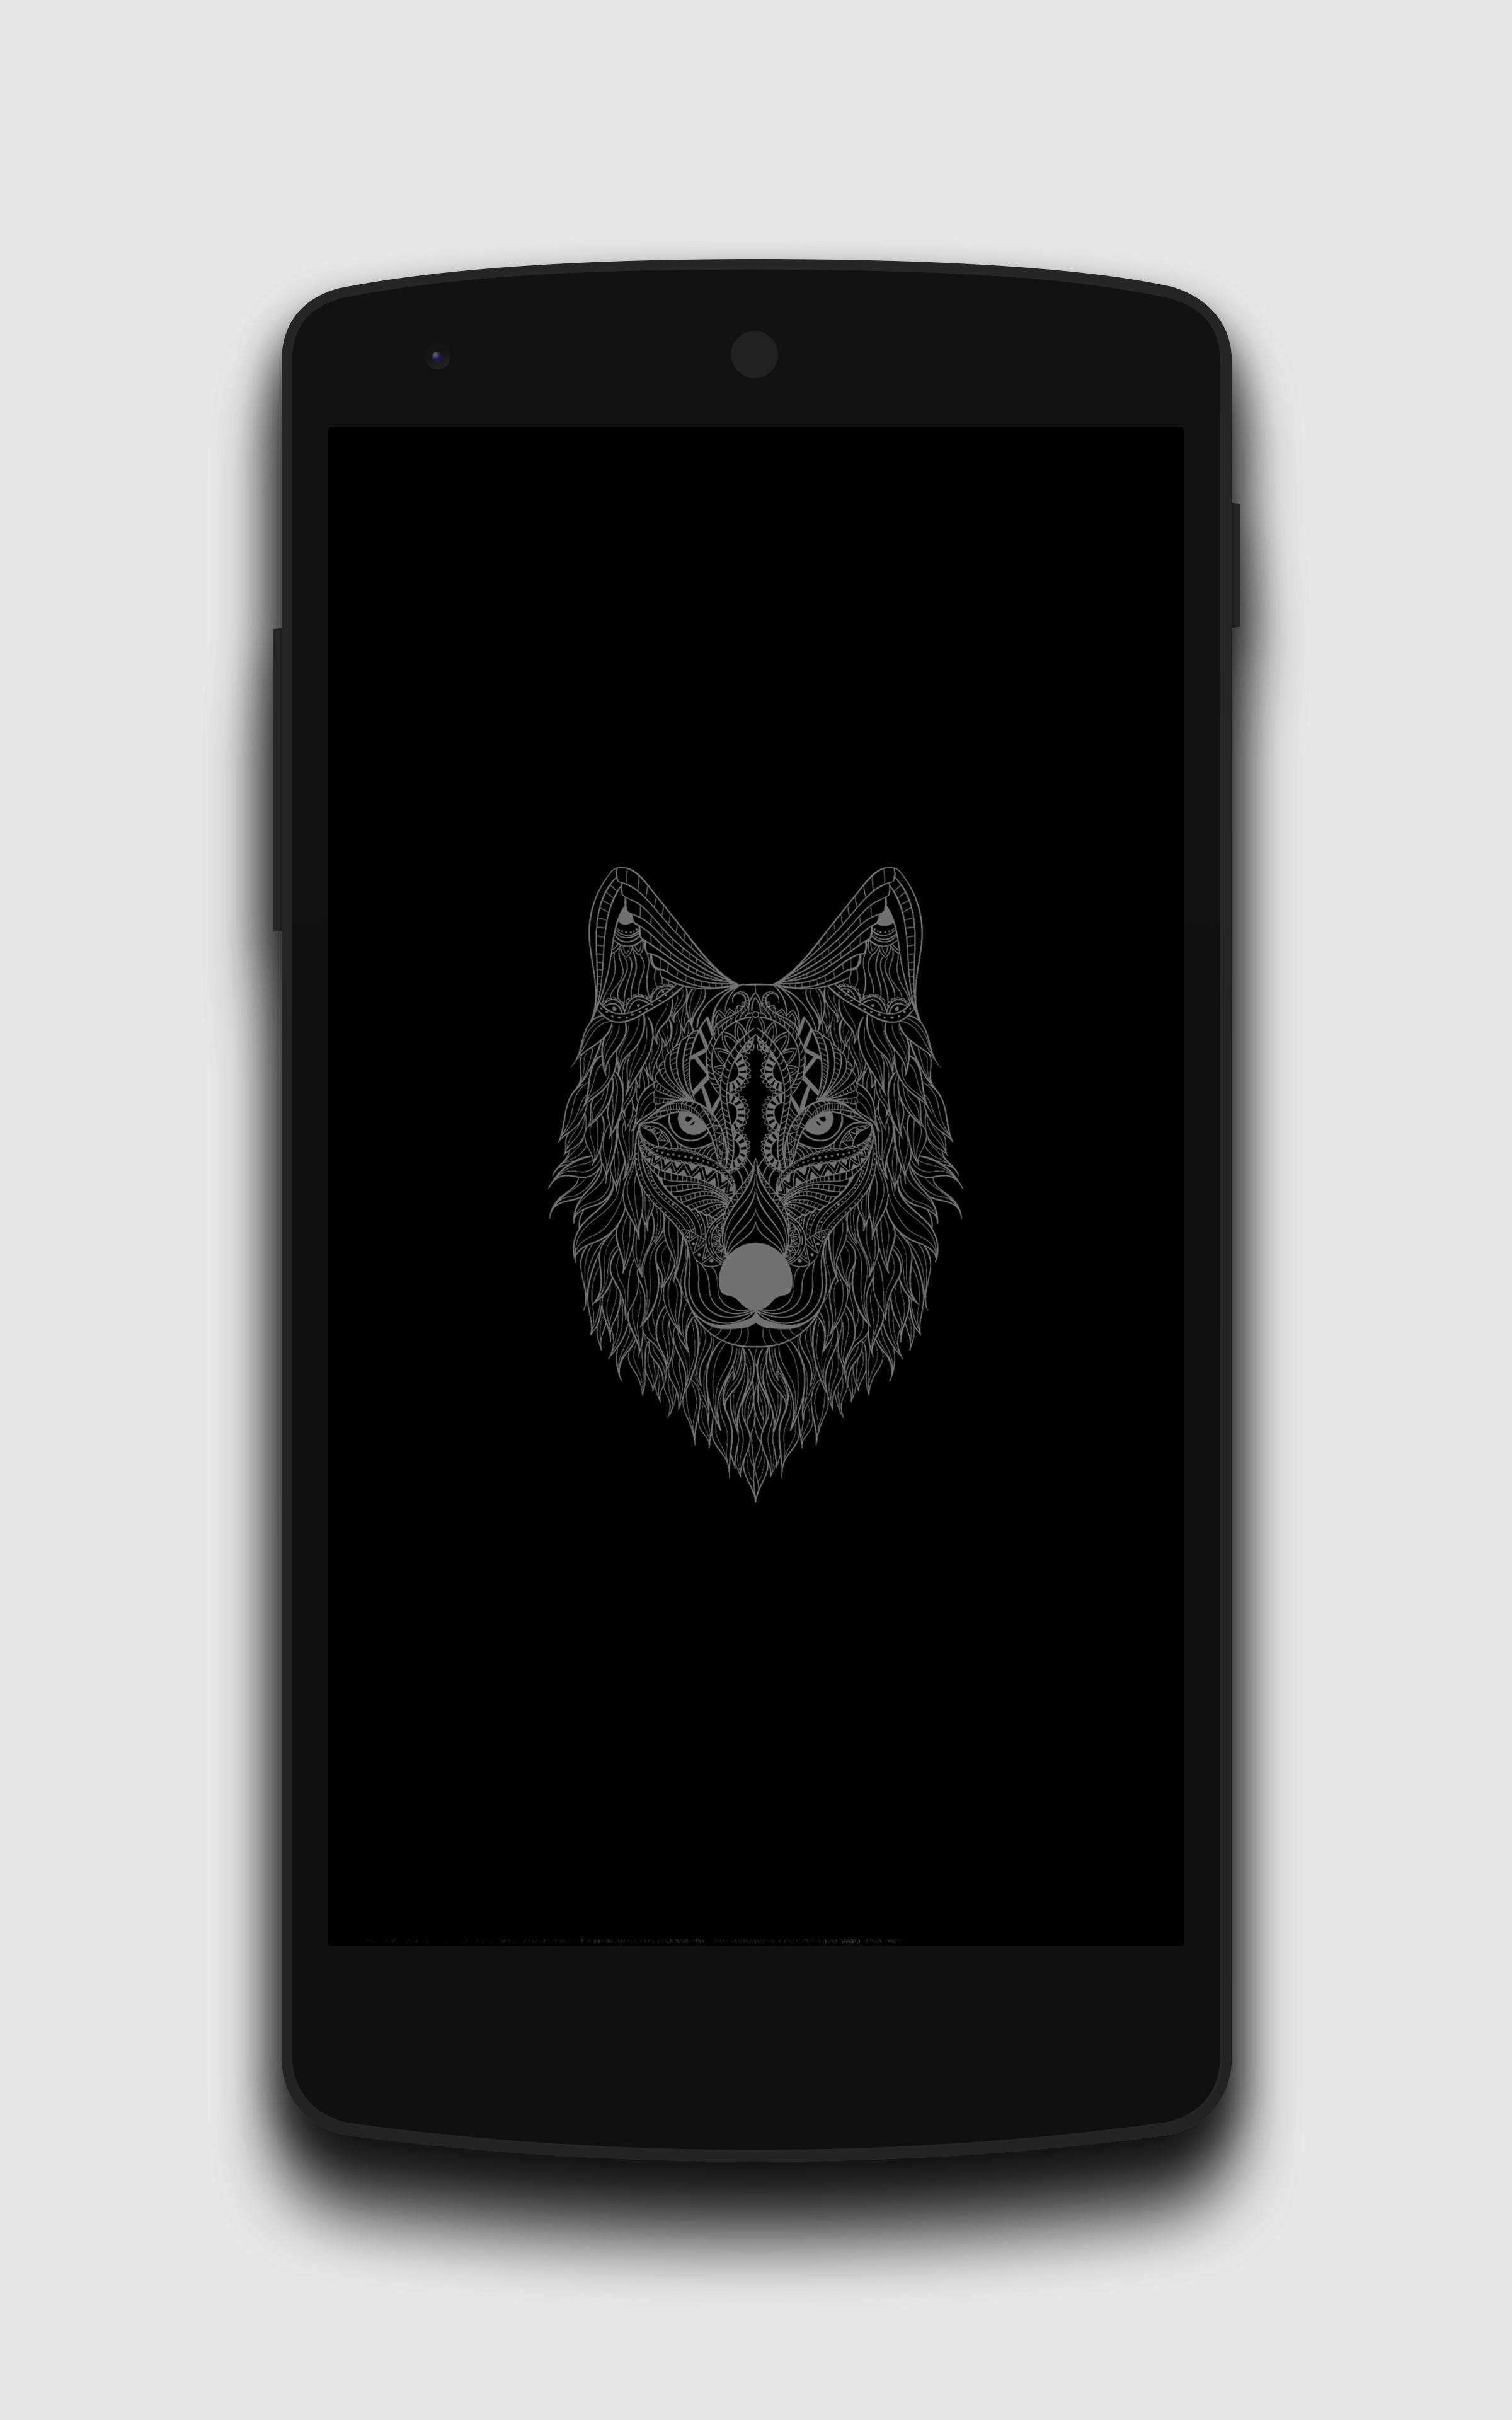  AMOLED  Black  Wallpapers  2K 4K for Android APK  Download 